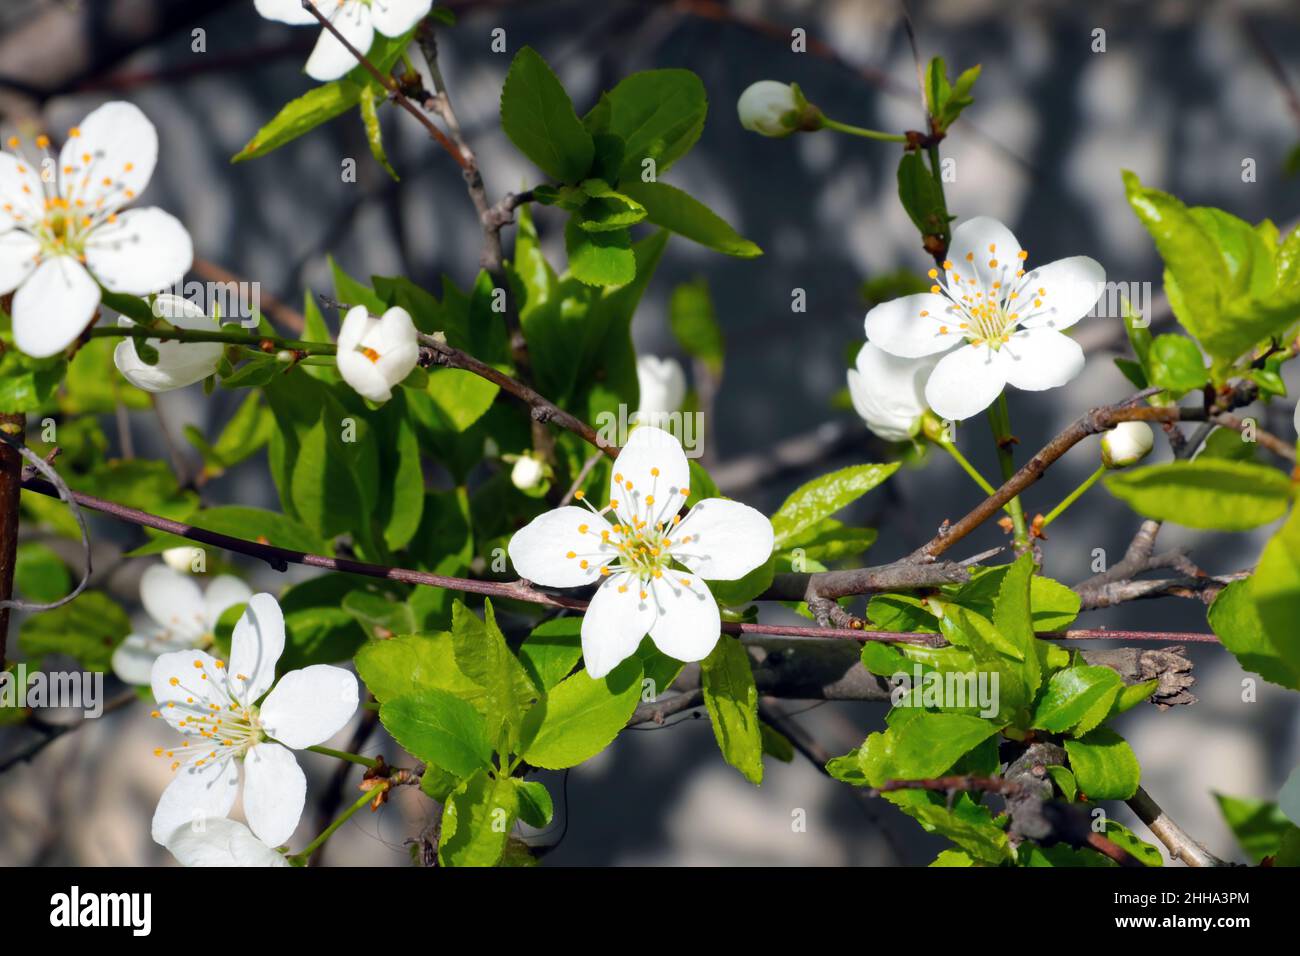 A branch of apple or cherry blossoms in the spring in the garden Stock Photo